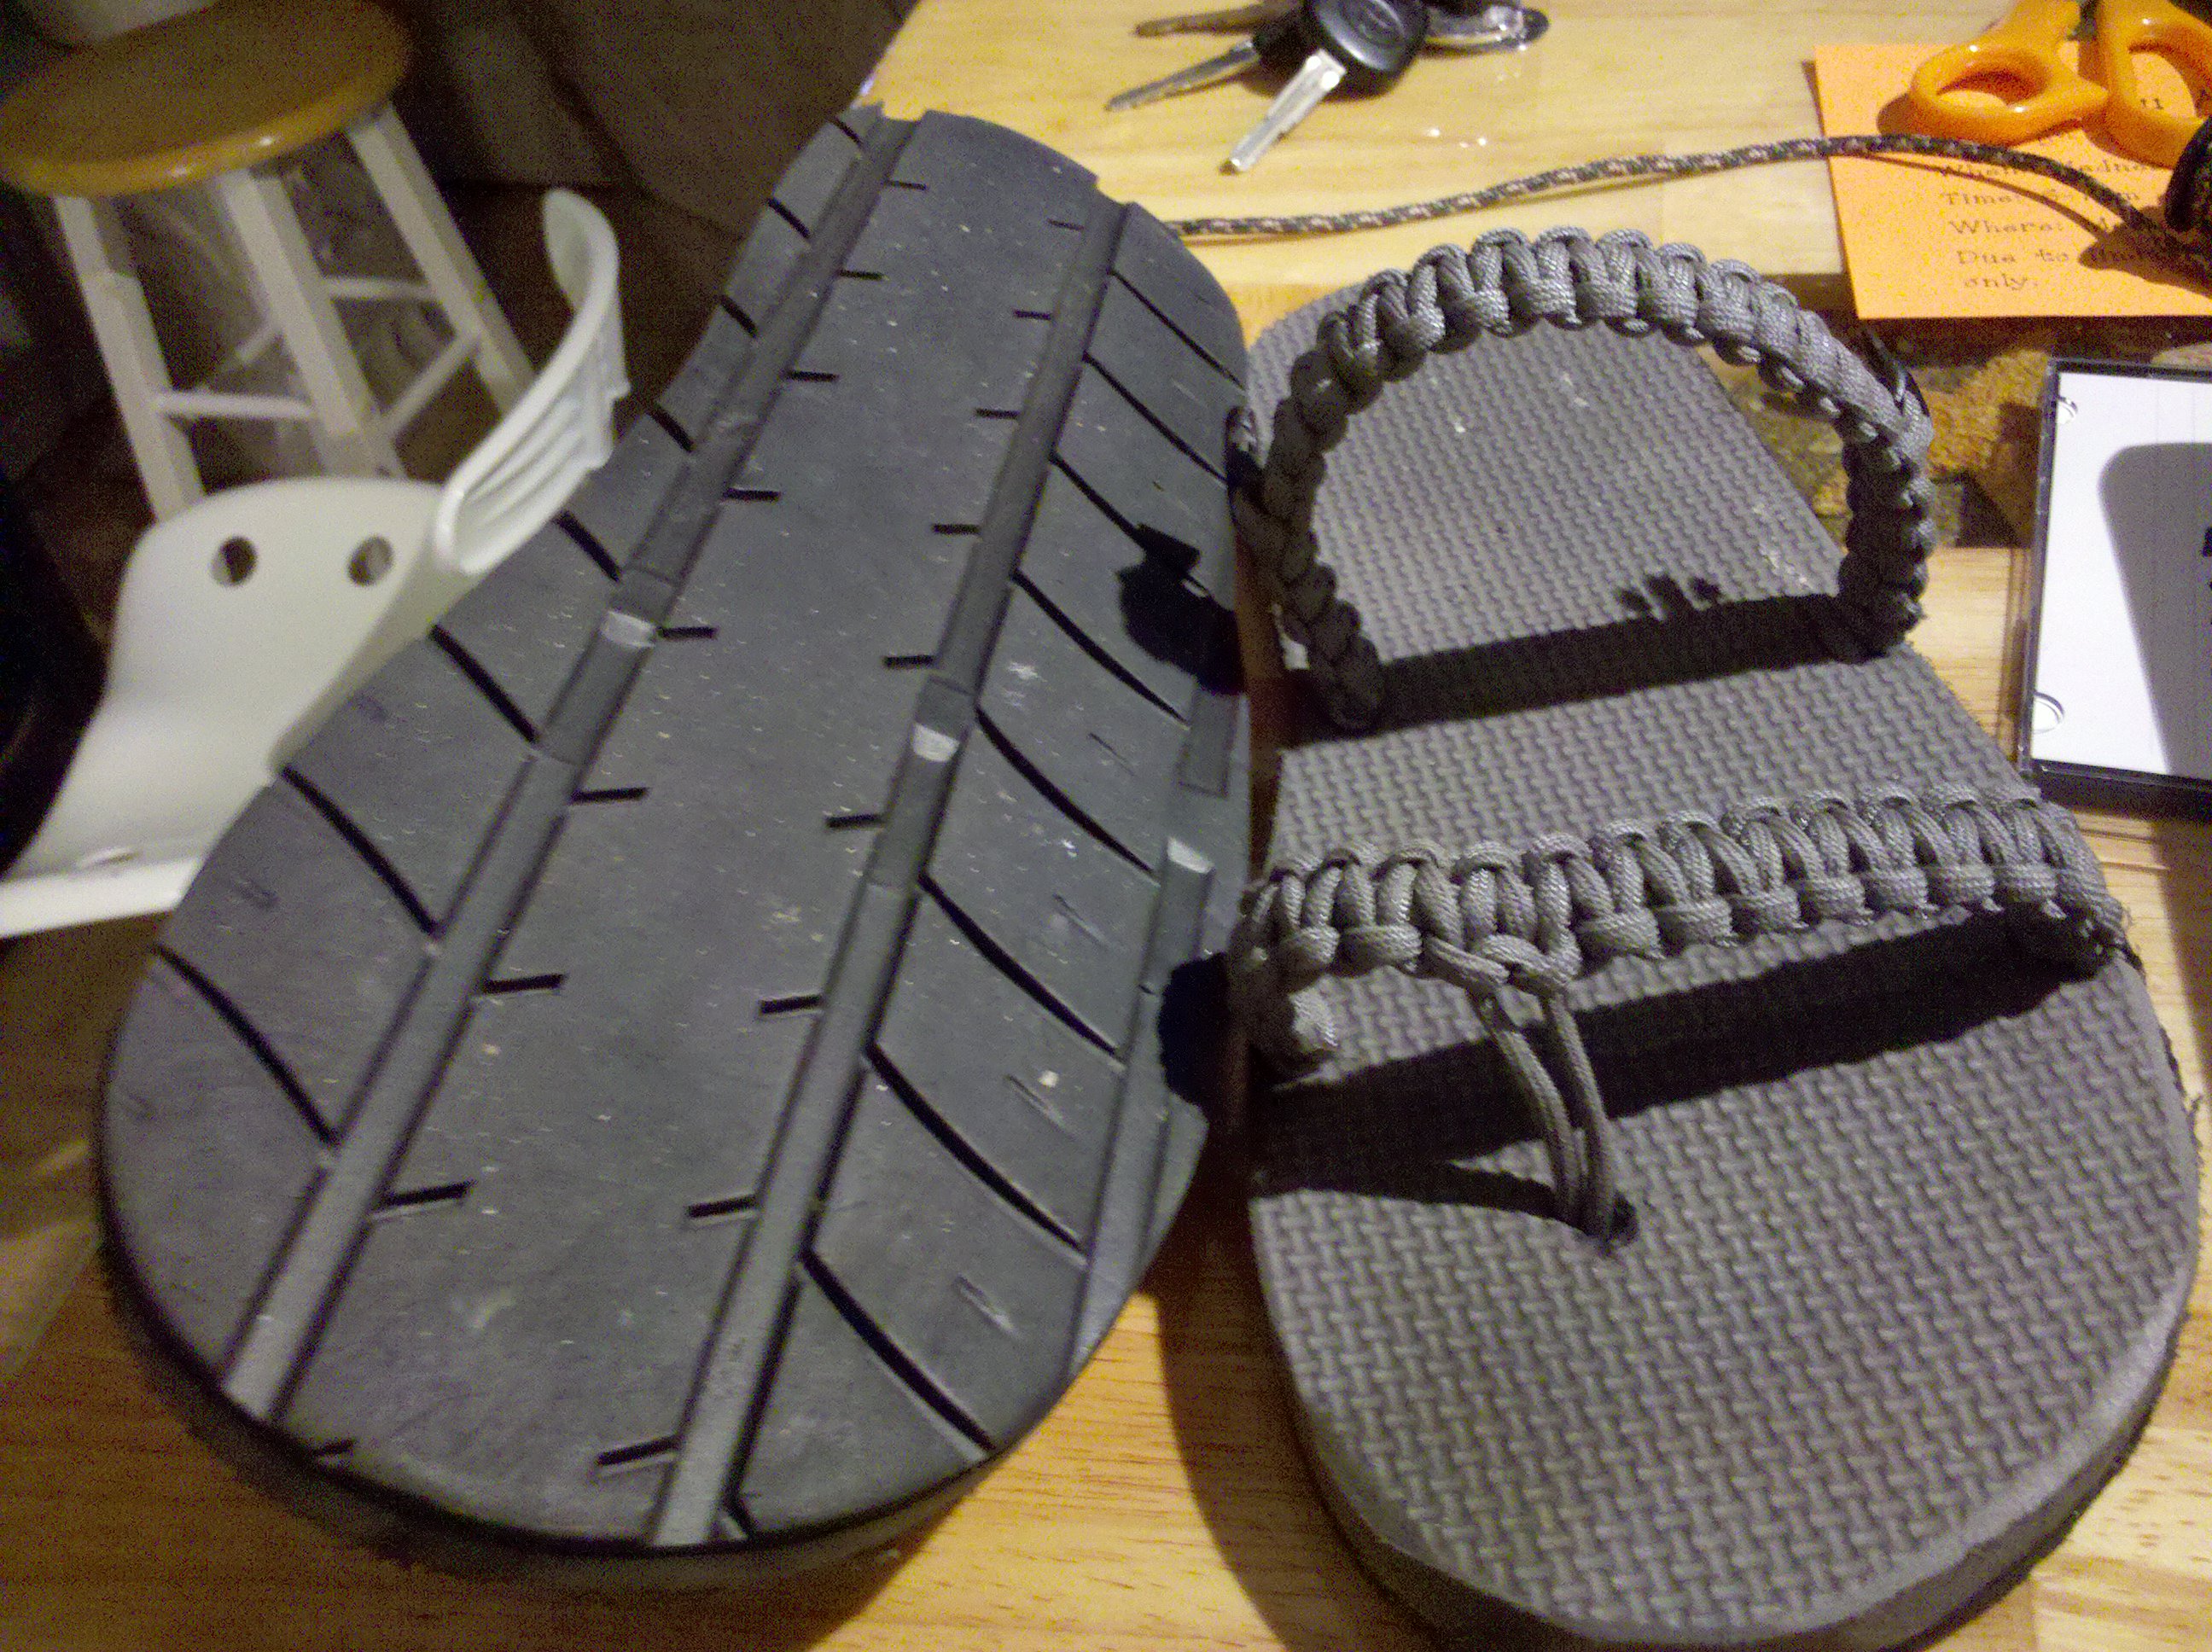 An old project Making your own flip  flop  sandals  